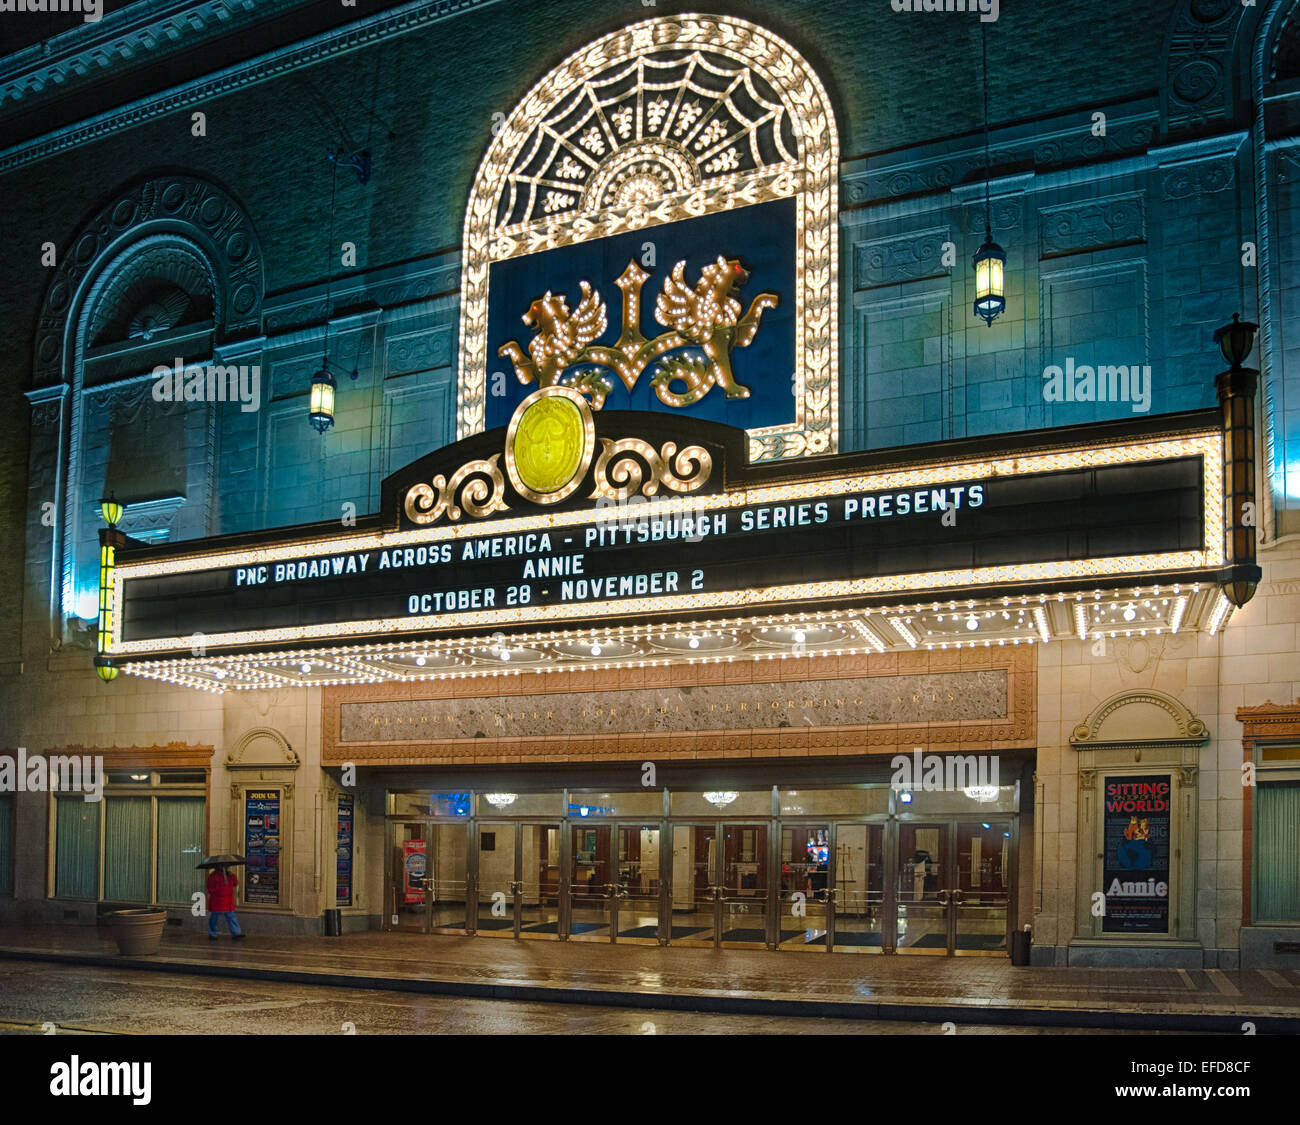 The Benedum Center is a popular Pittsburgh Cultural District performing